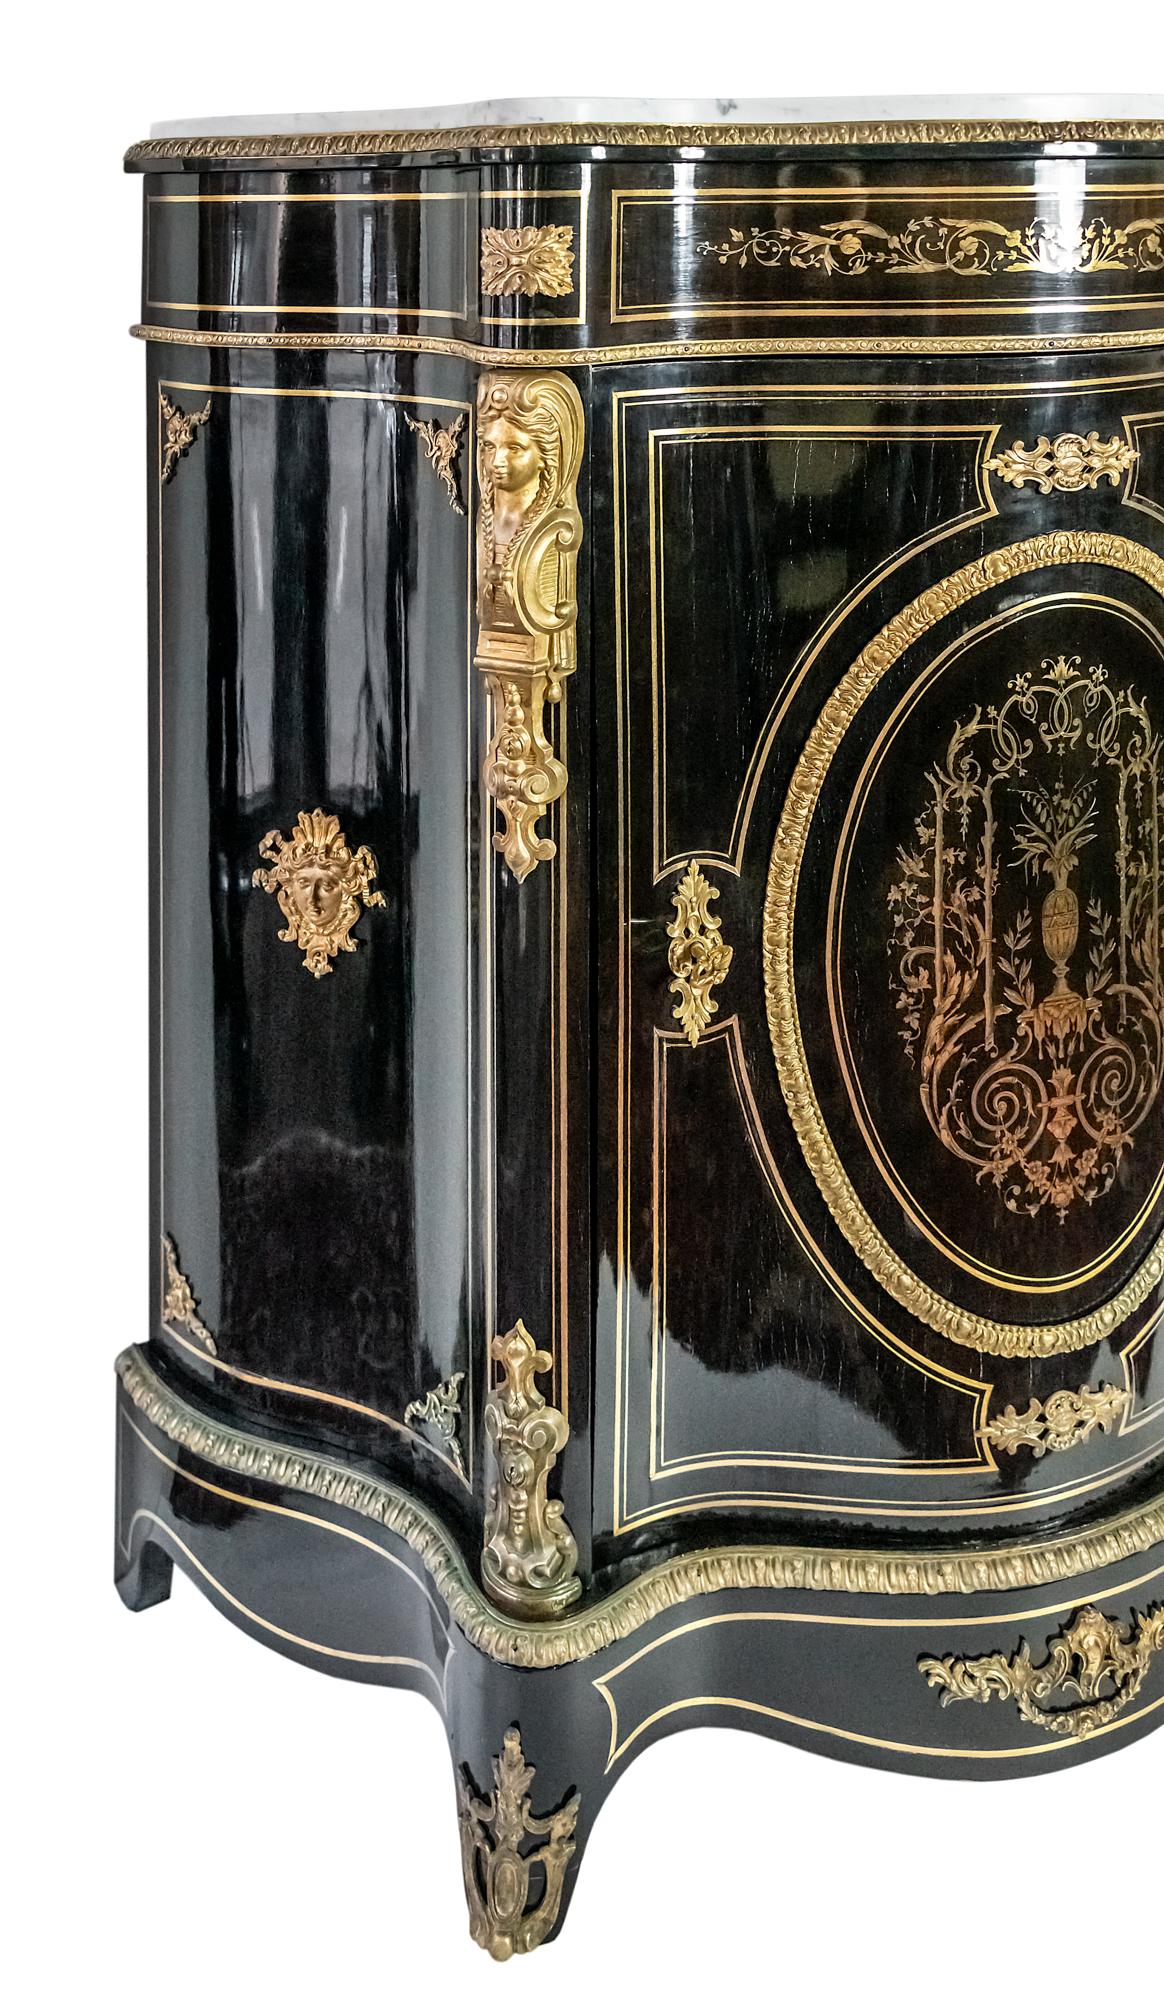 French antique Napoleon III cabinet.
Wood is black color polished surface, decorated with inlaid brass decor and bronze details outside.
Inside the cabinet there are two shelves.
Cabinet top is marble.
Very good antique condition.